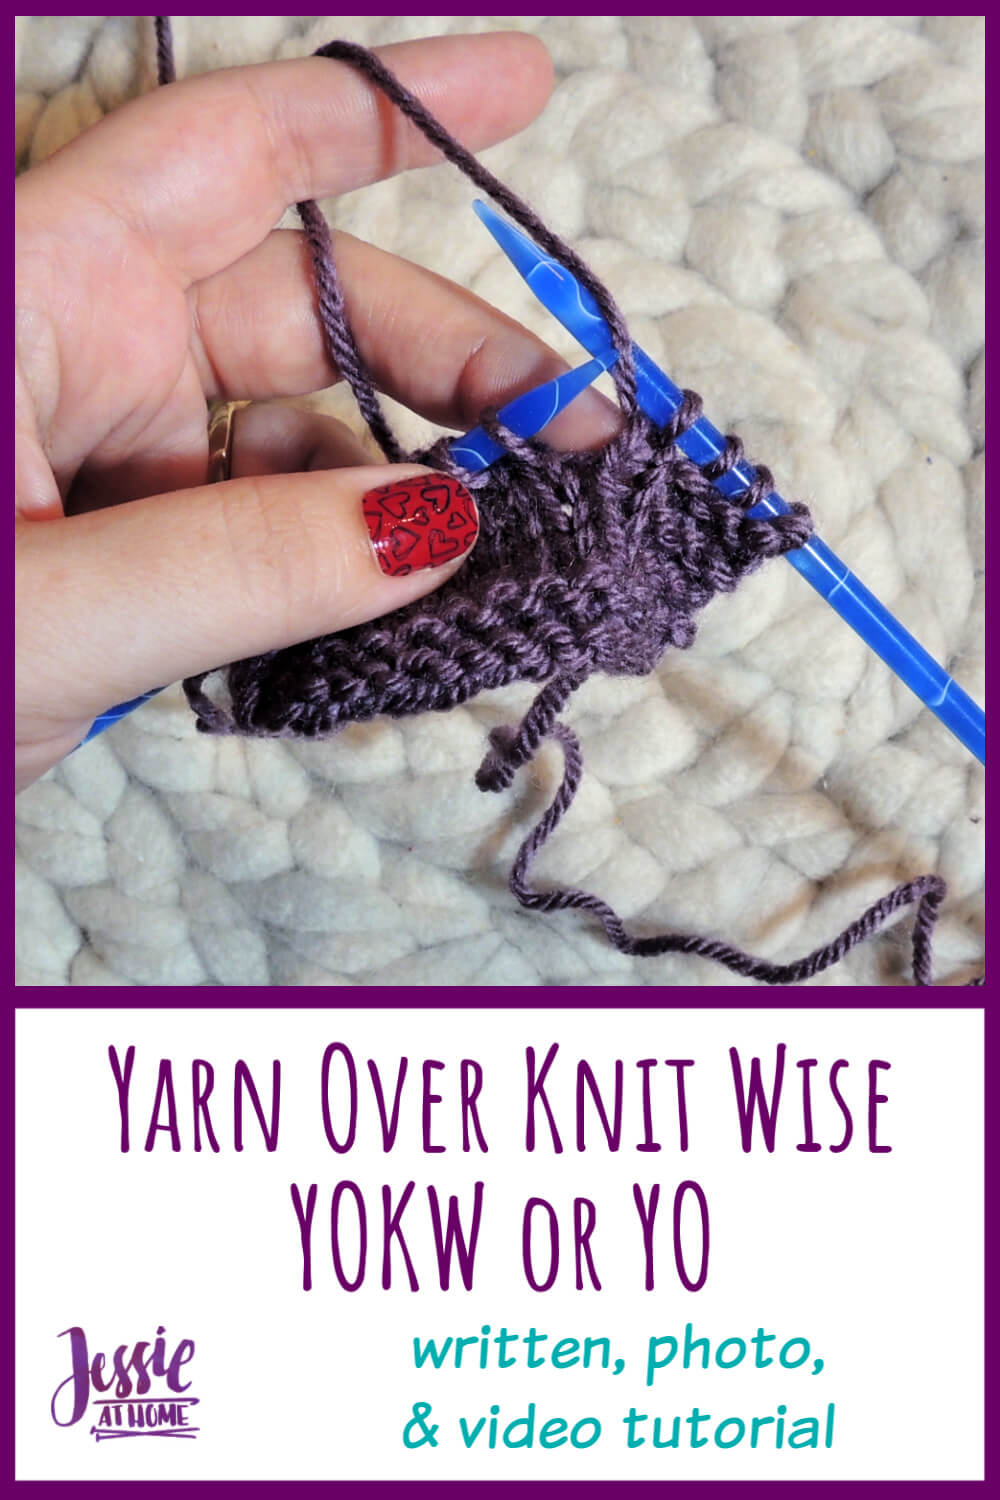 Yarn Over Knit Wise - YOKW or YO - so simple to do!